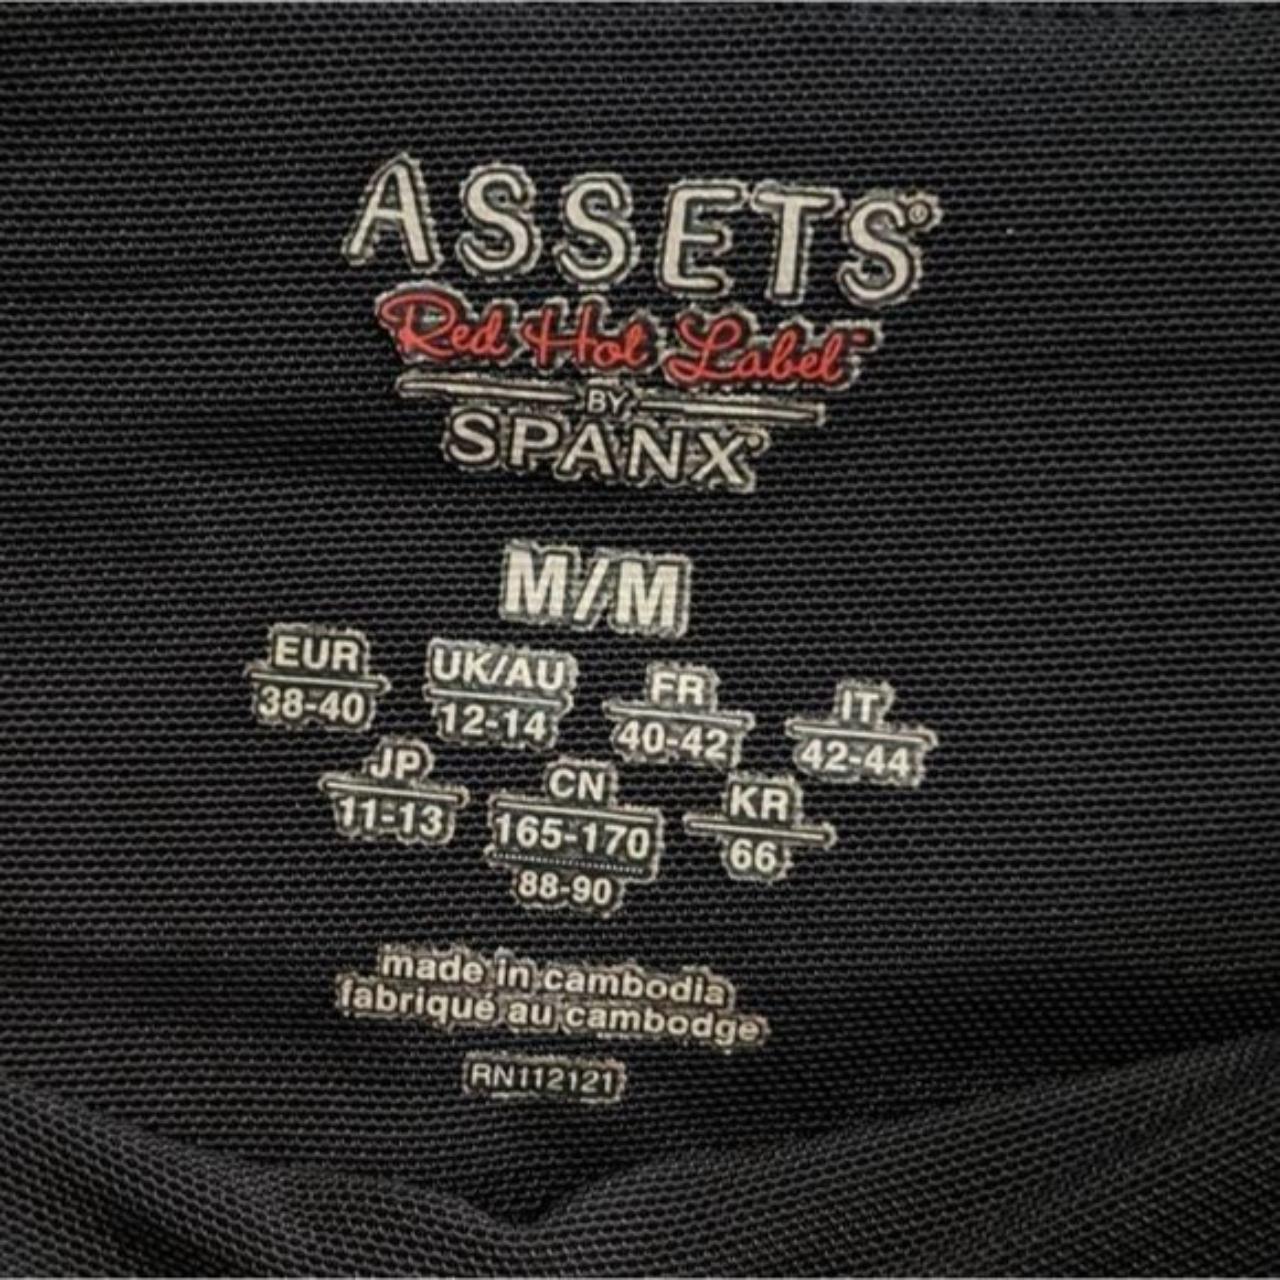 Spanx Assets Red Hot label black high waisted racing